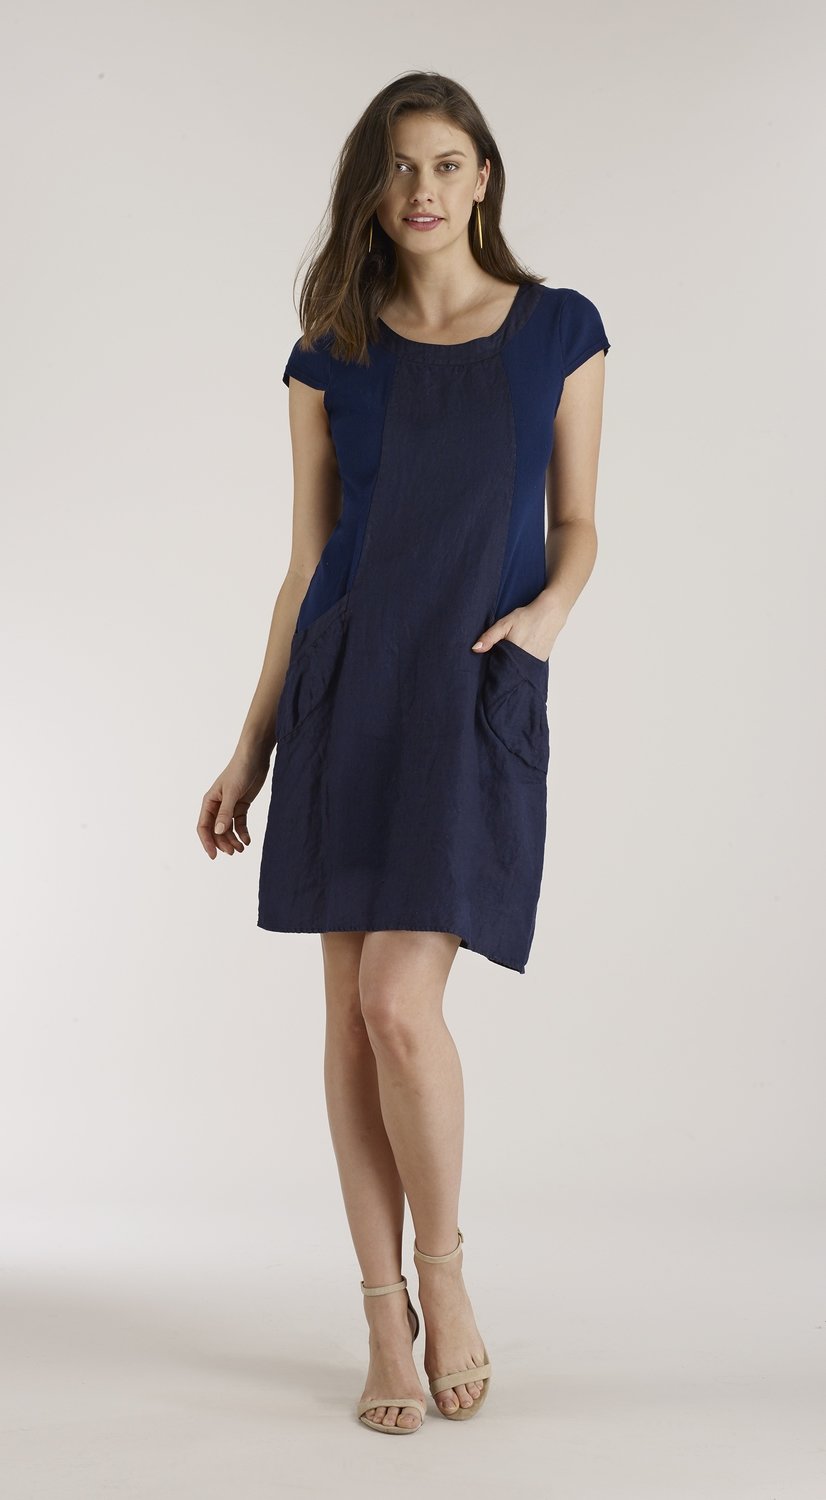 Luna Luz: Ribbed Linen & Cotton Capped Sleeve Dress SOLD OUT